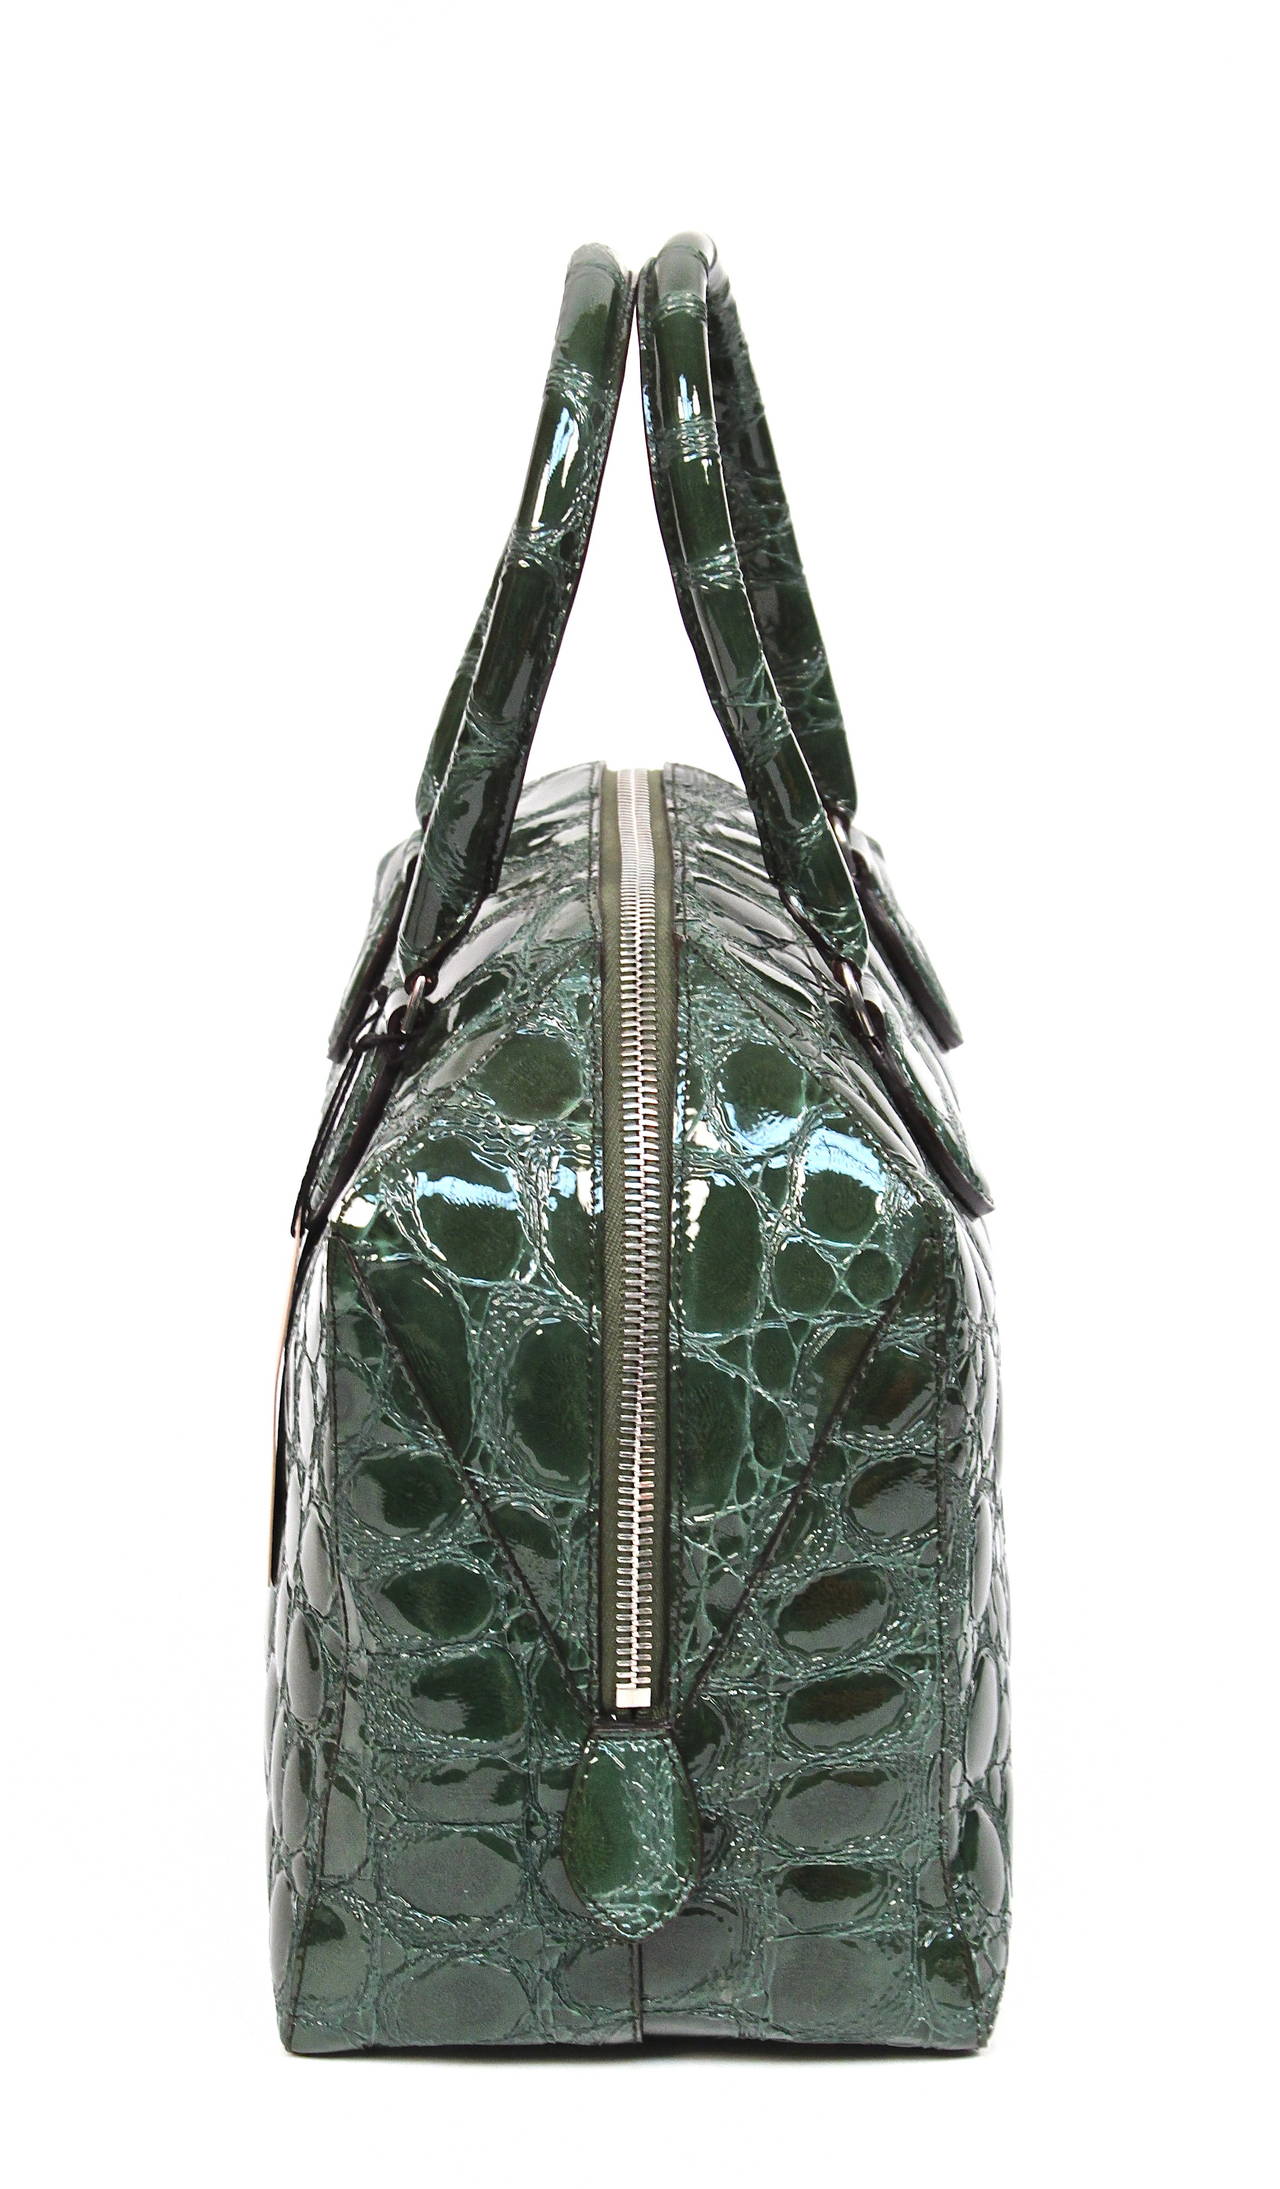 Unusual green crocodile embossed patent leather bag with silver toned hardware from Azzedine Alaia. Approximate measurements are:  13